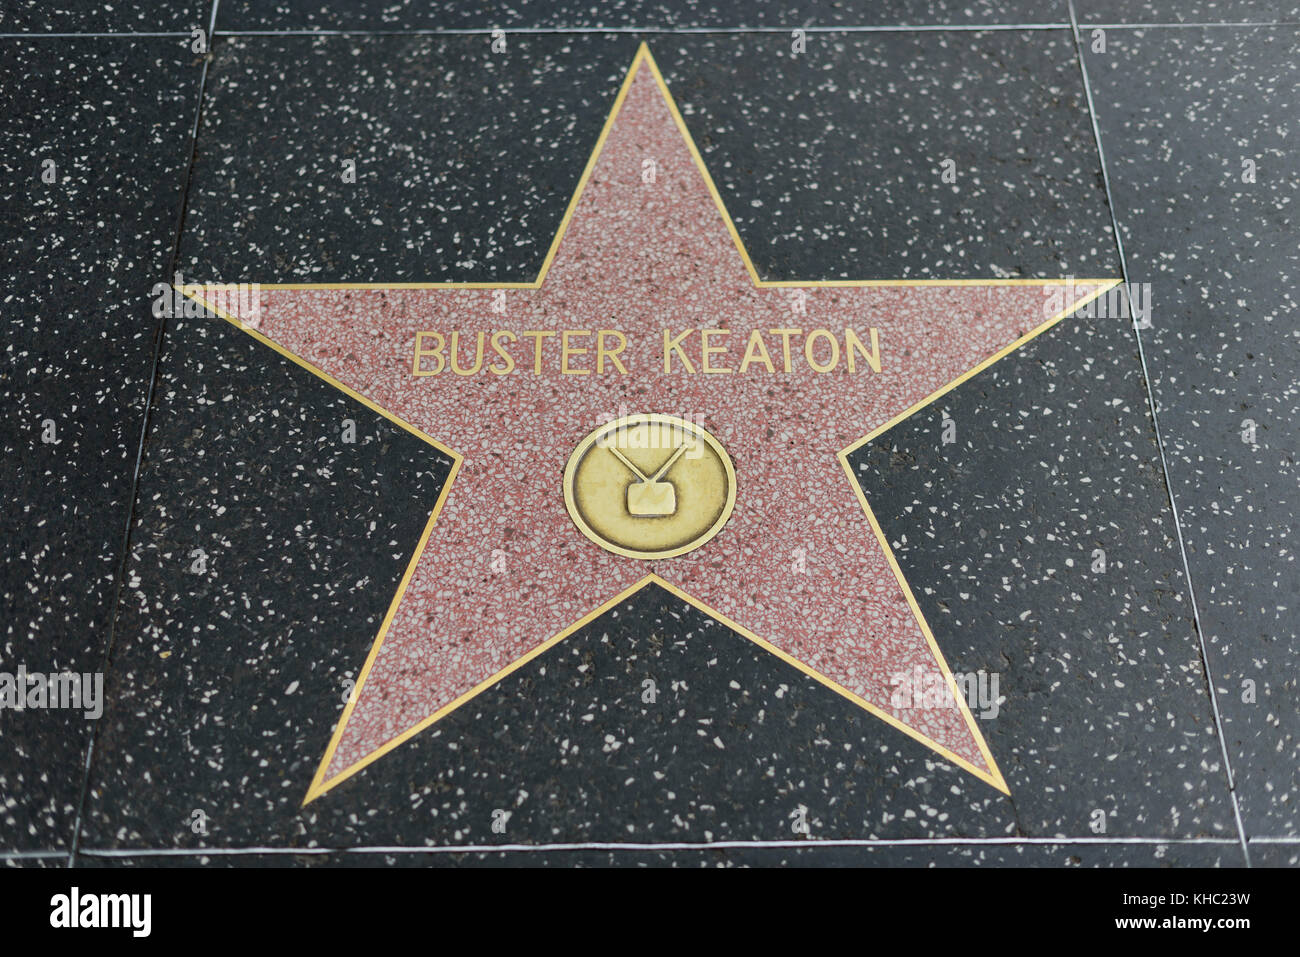 HOLLYWOOD, CA - DICEMBRE 06: Buster Keaton star on the Hollywood Walk of Fame a Hollywood, California il 6 dicembre 2016. Foto Stock